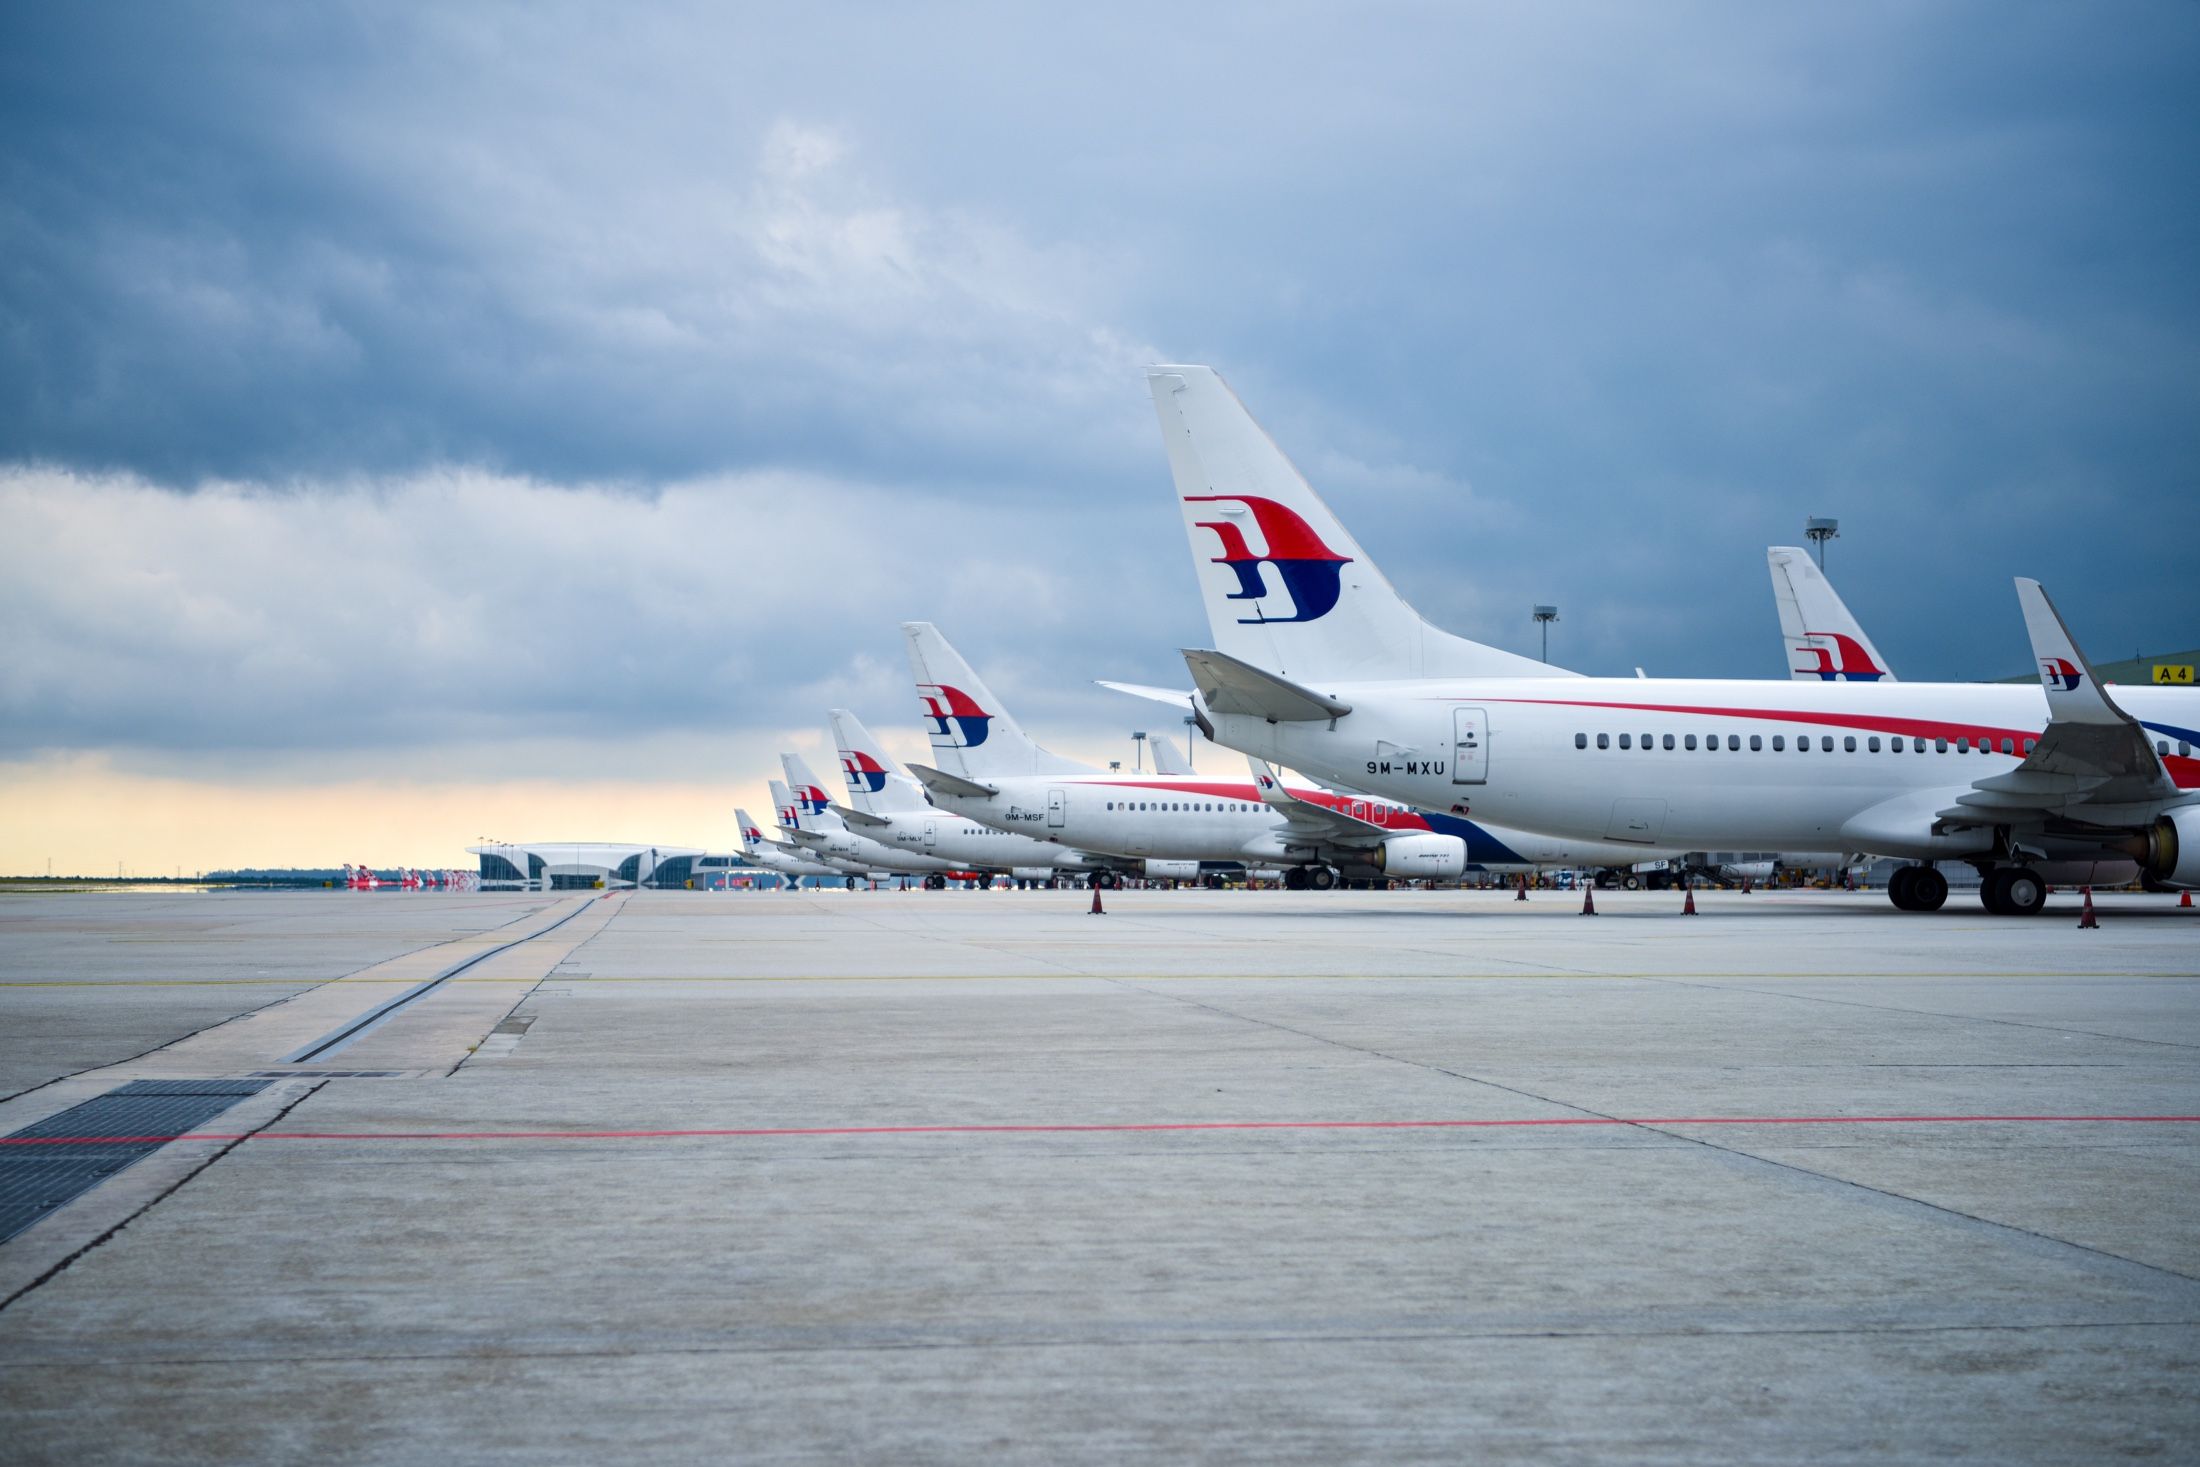 Malaysia-Airlines Boeing 737 parked